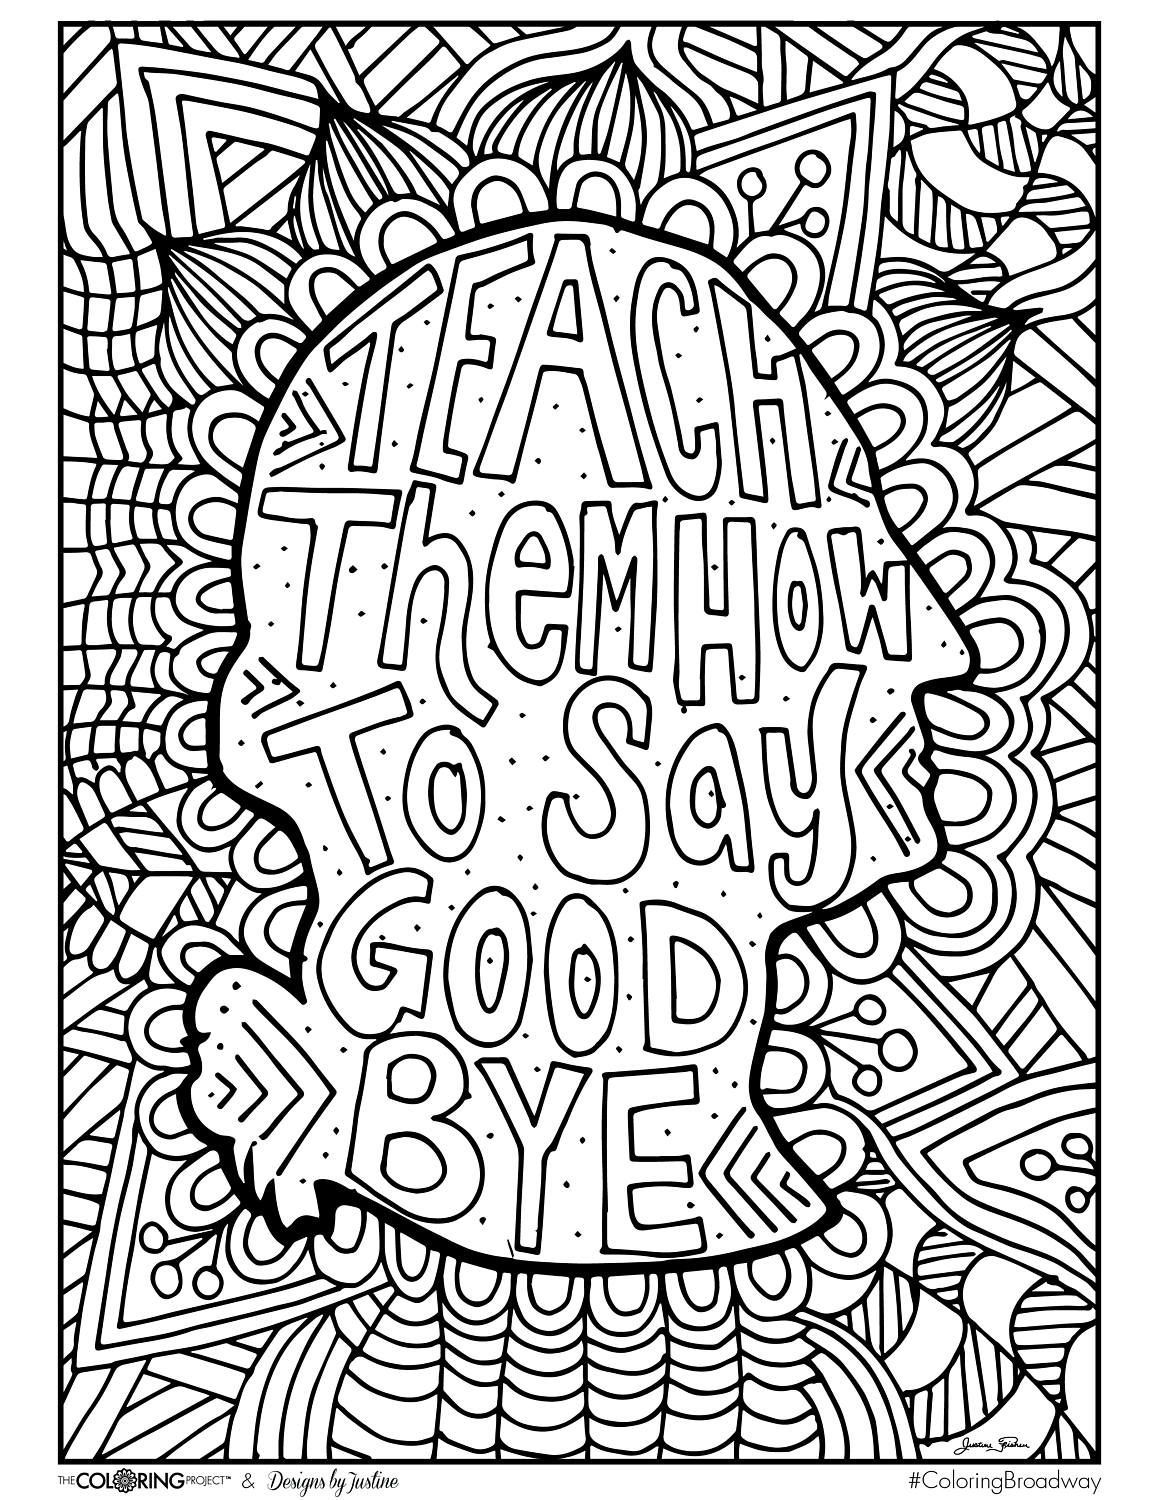 Teach them how to say goodbye | Coloring pages, Quote coloring pages,  Coloring books